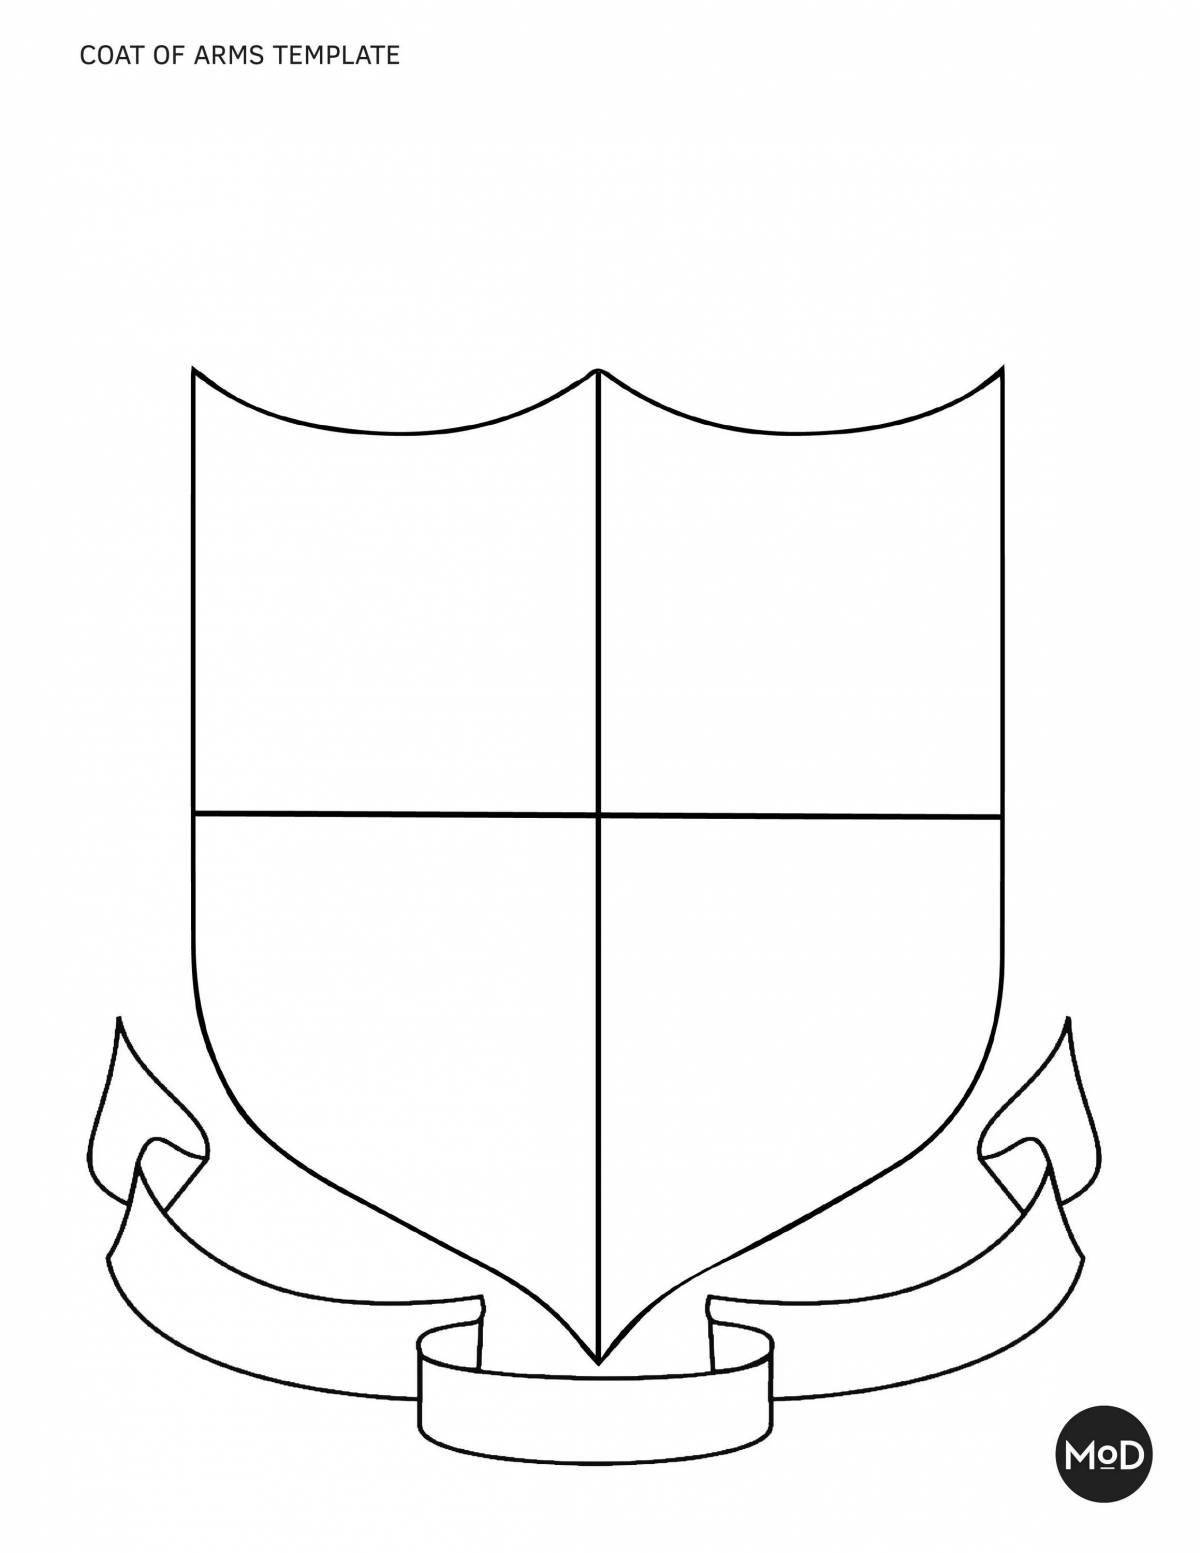 My family coat of arms #2